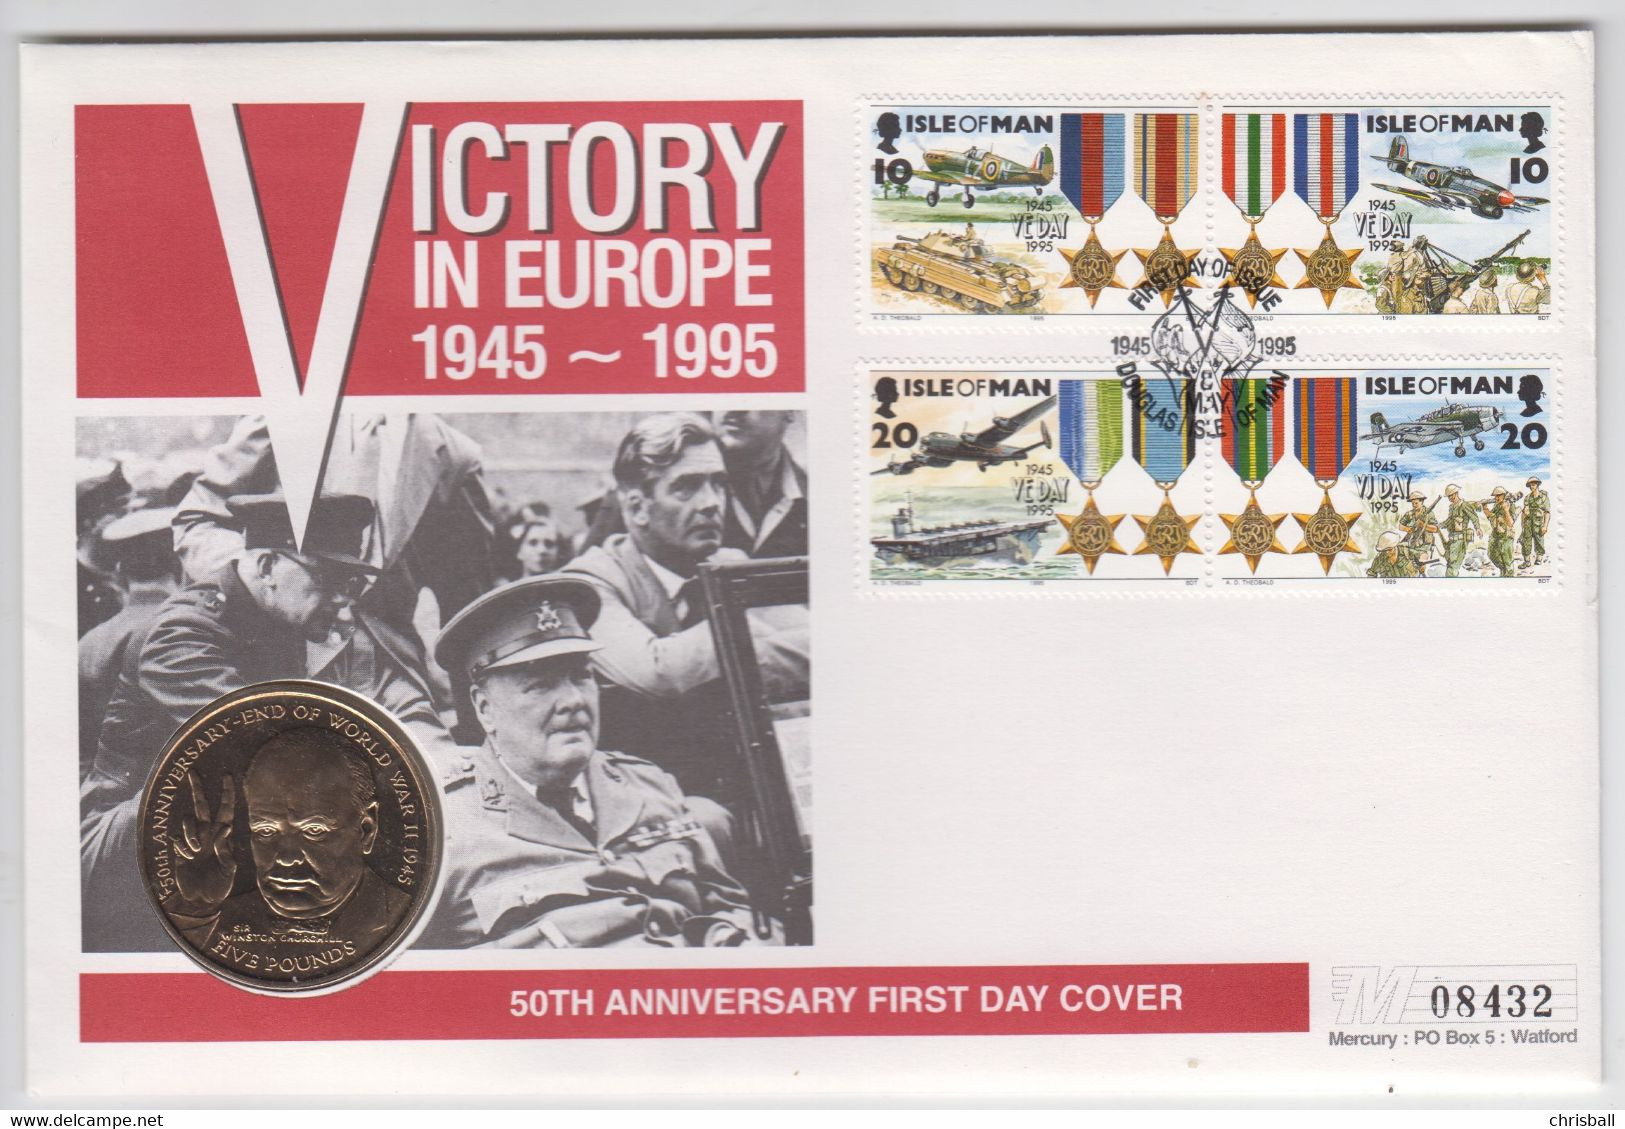 Isle Of Man 1995 VE Day Coin & Stamp Cover Coin FDC - Isle Of Man